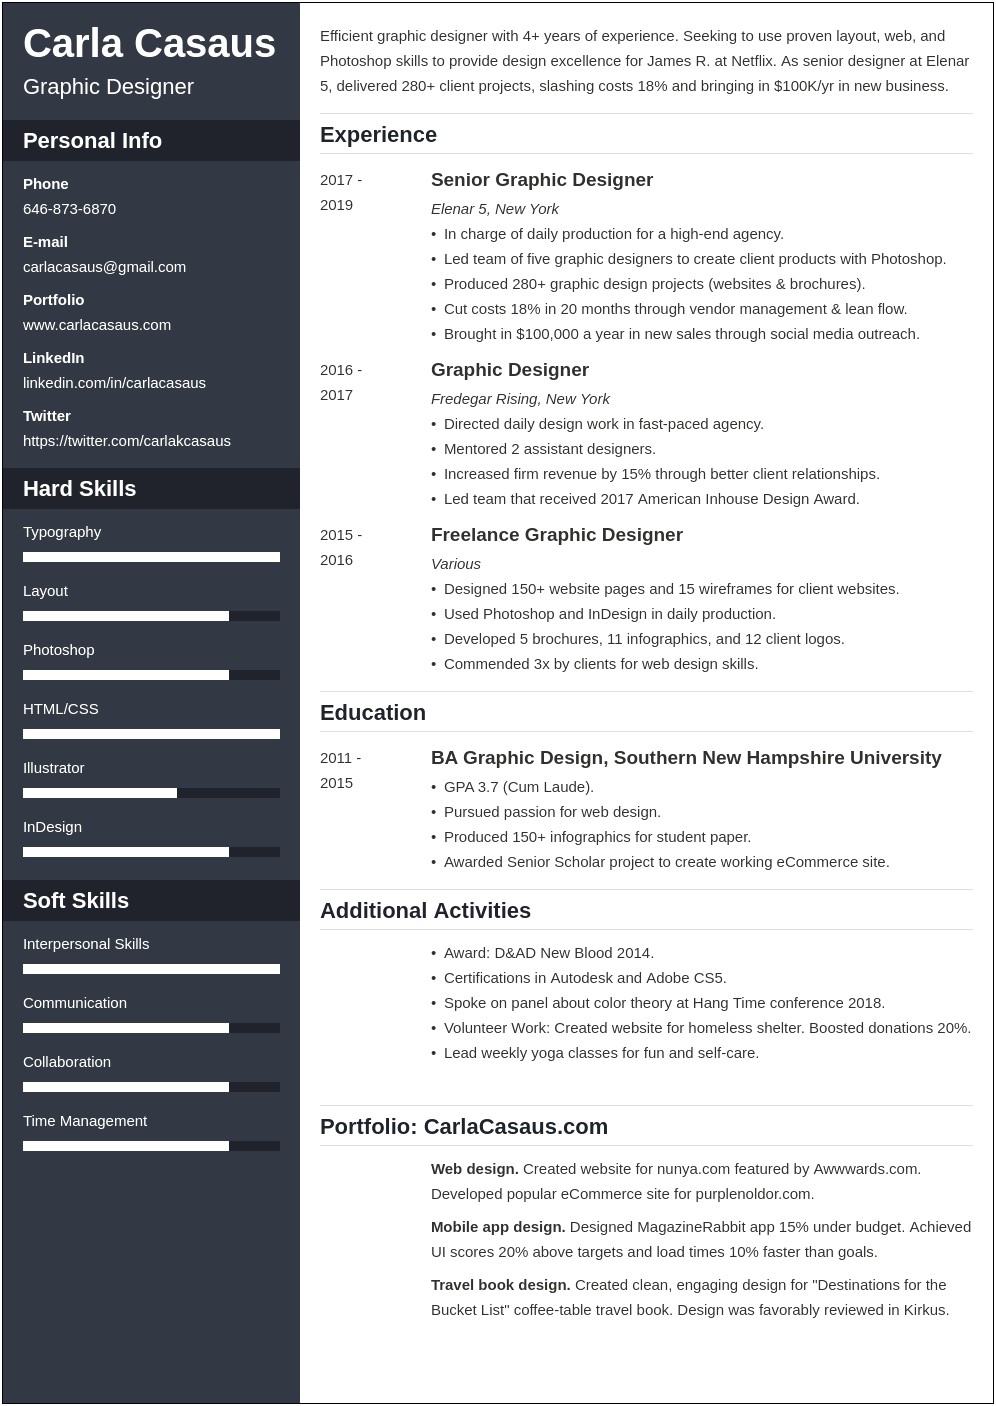 Ladders 2019 Resume Guide Best Practices & Advice